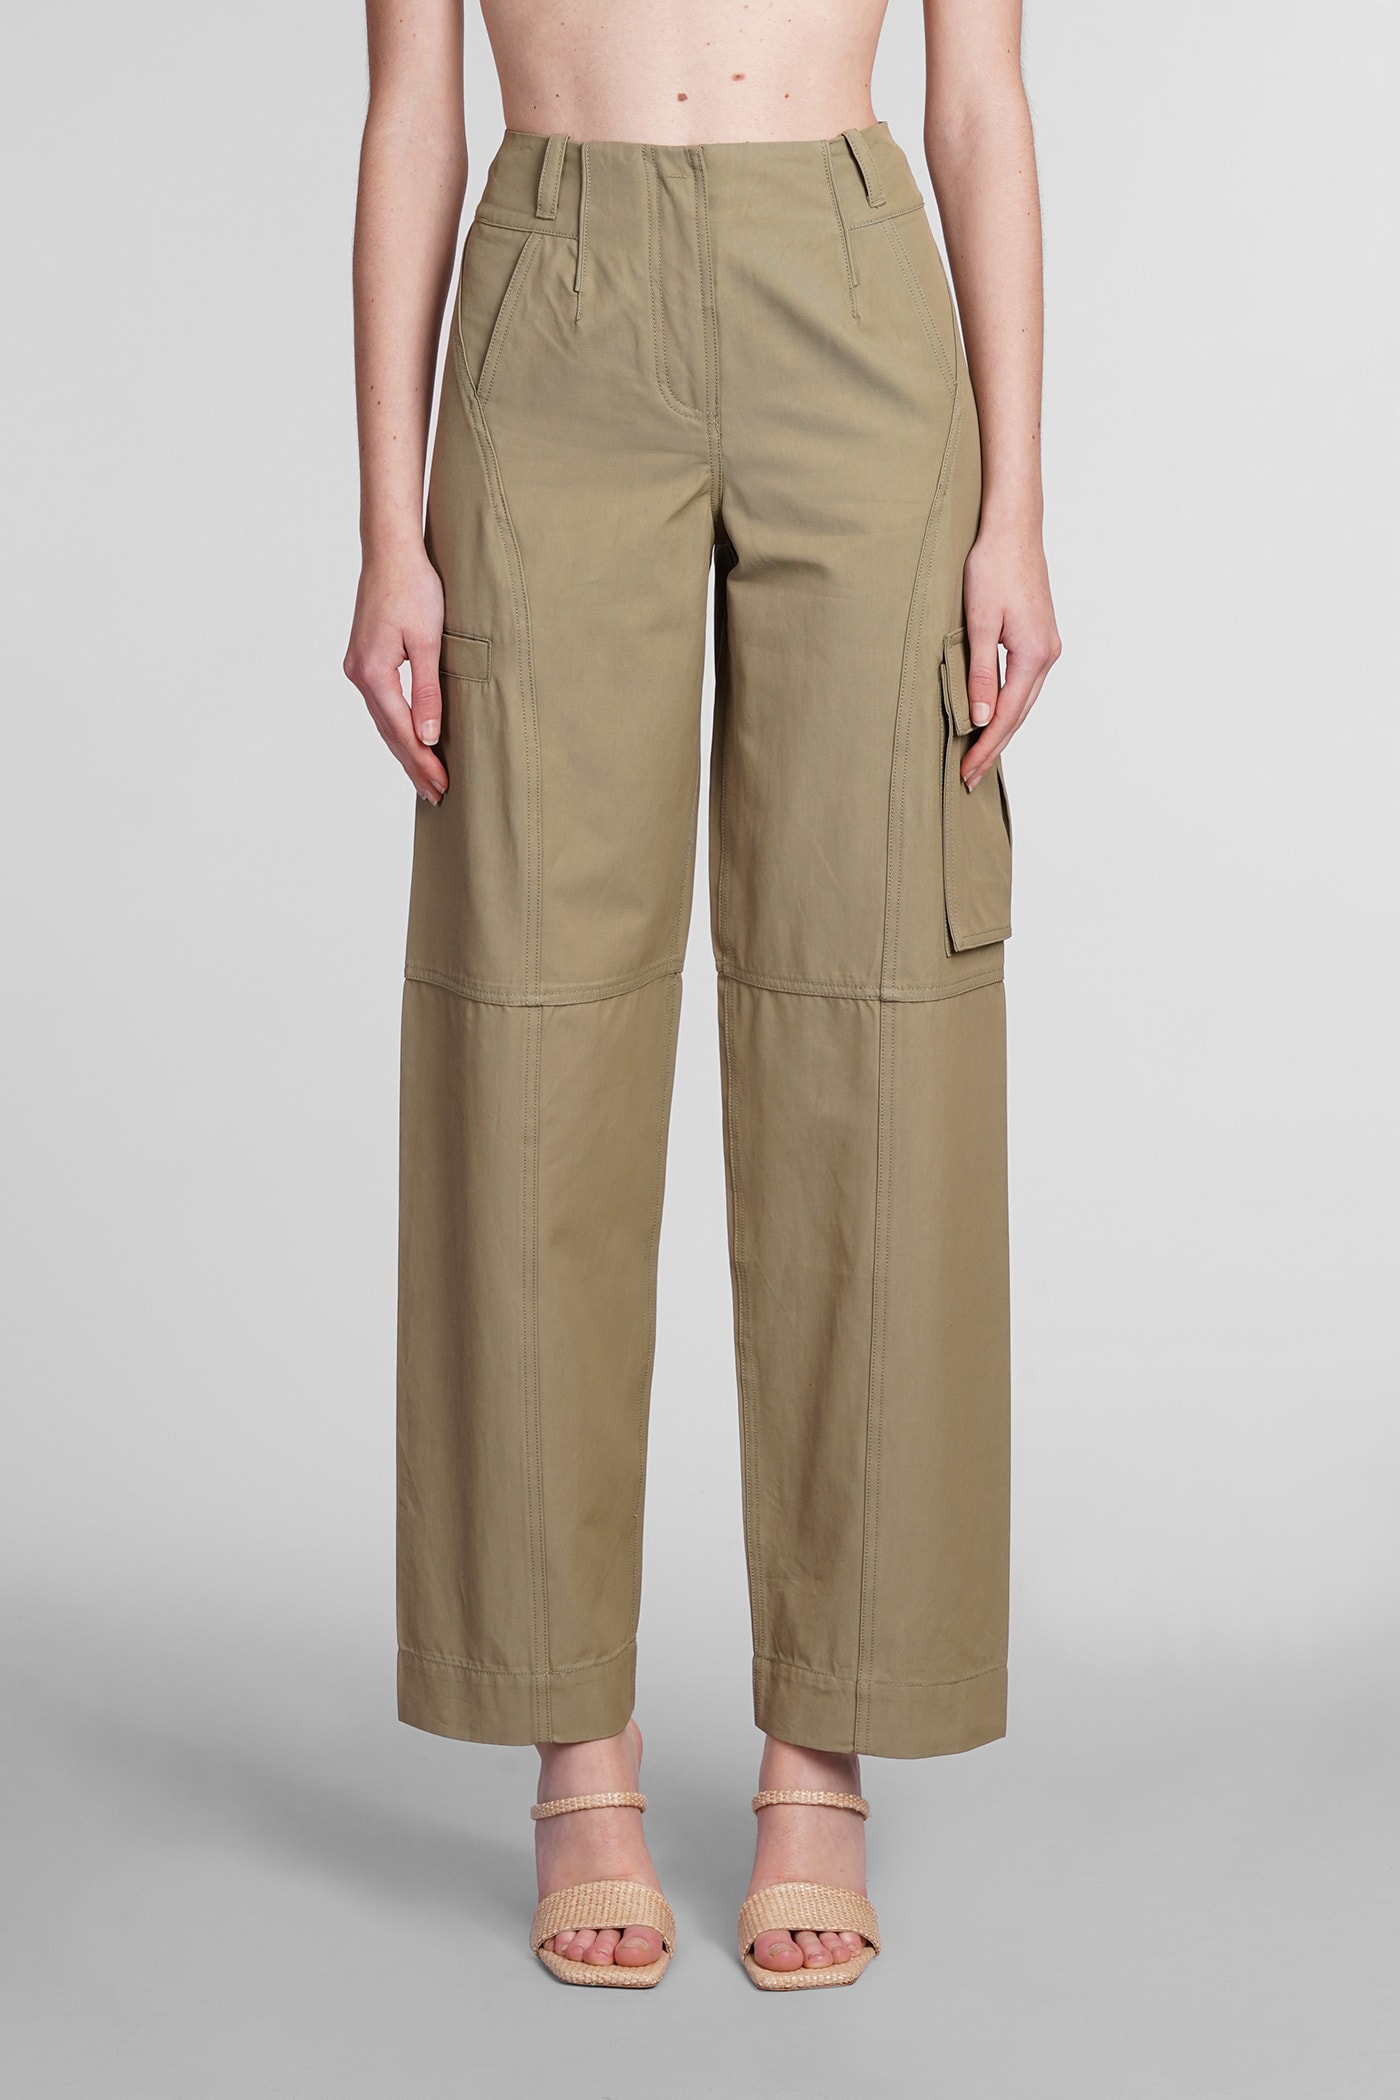 Cult Gaia Adrie Pants In Green Cotton